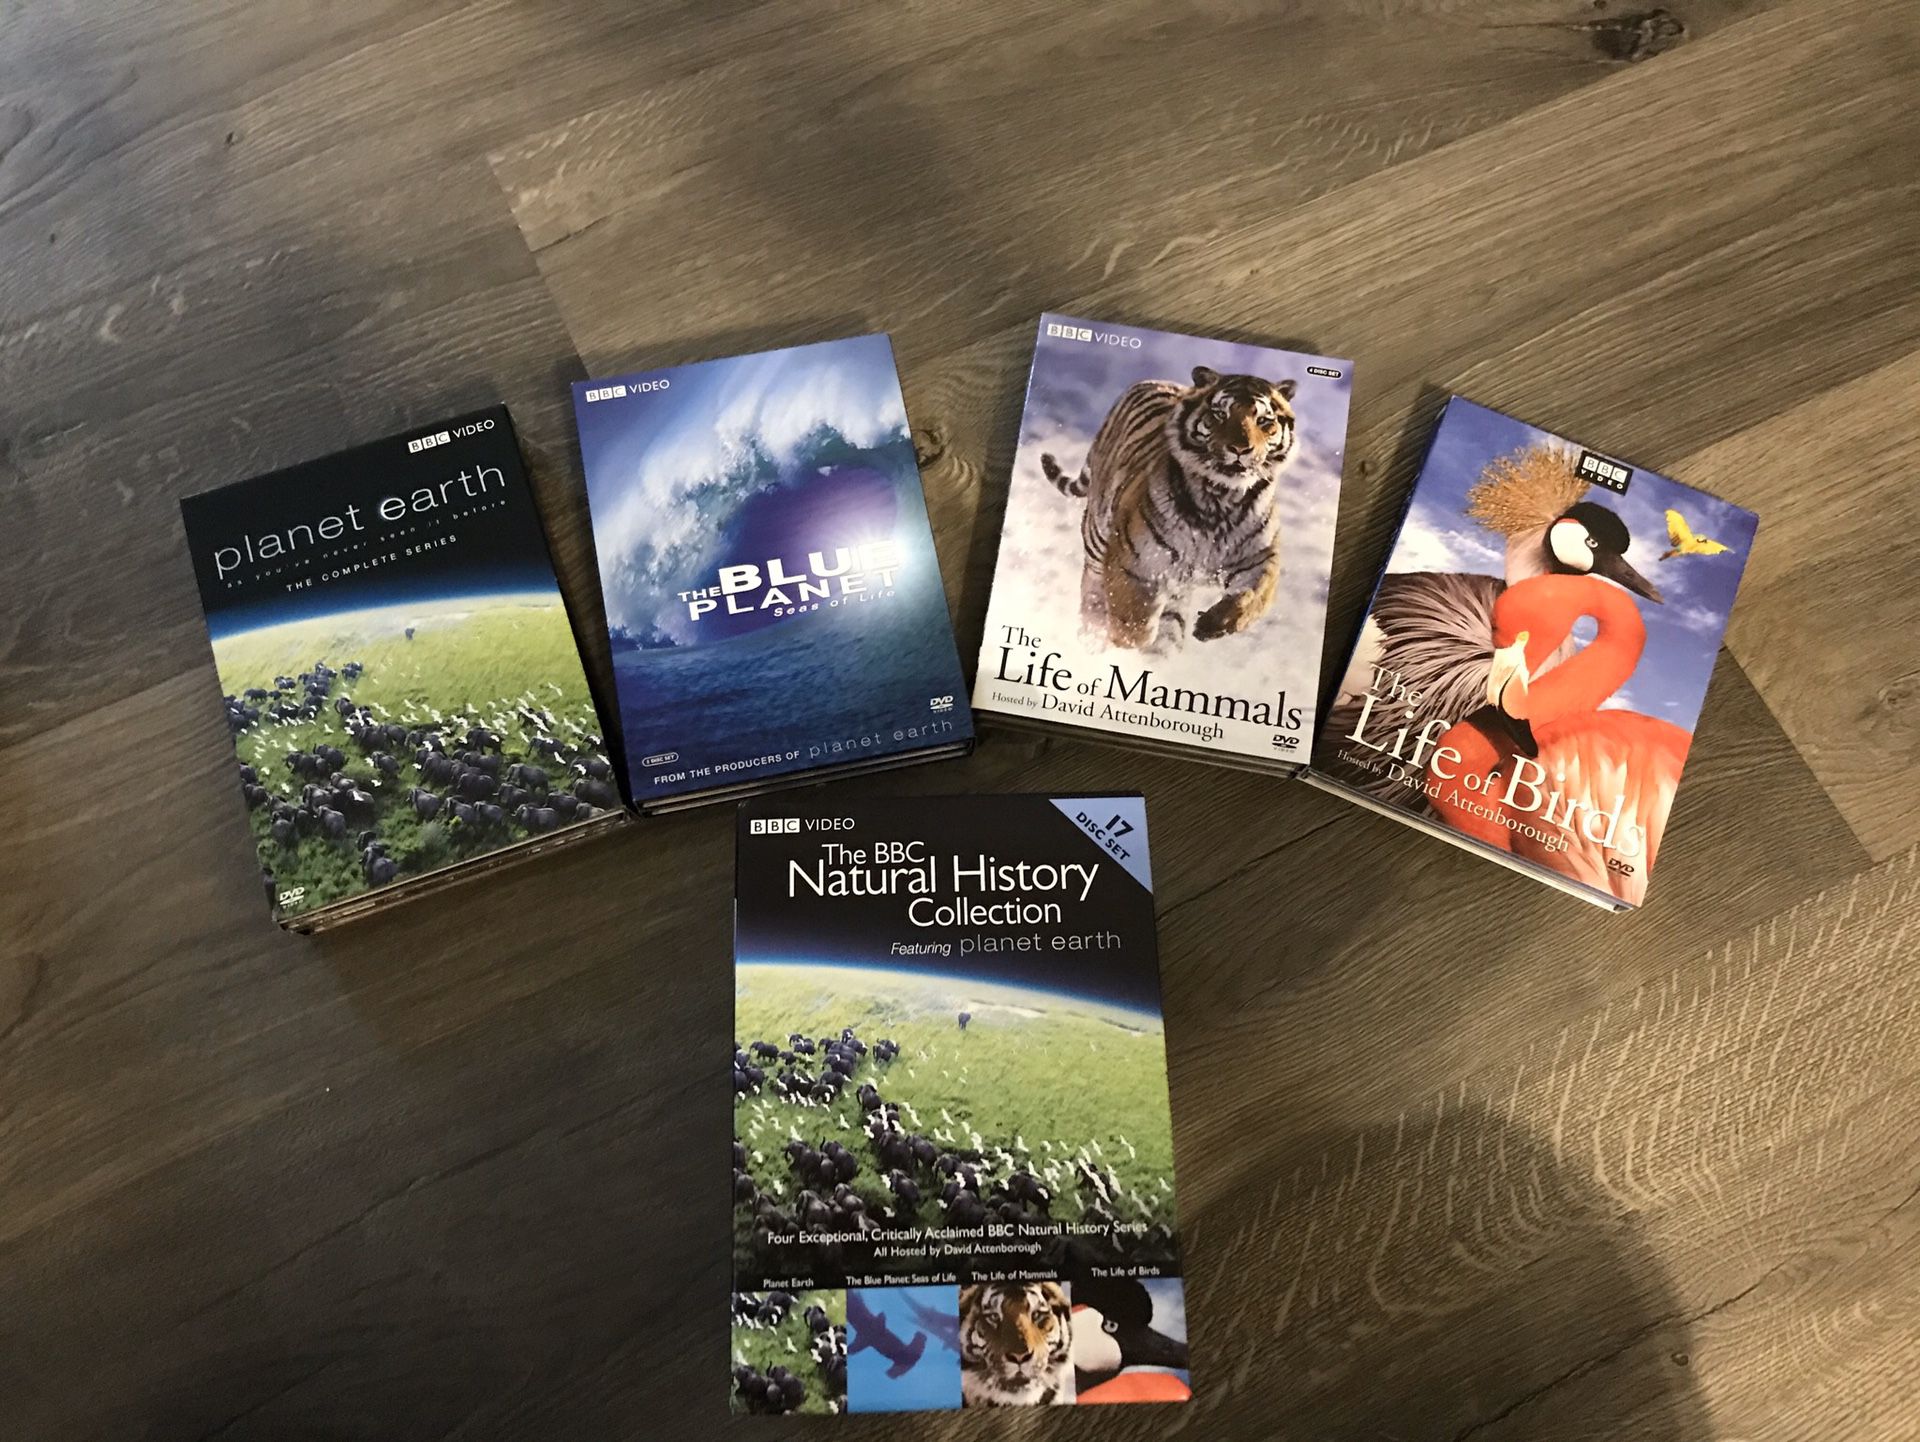 BBC Natural History Collection DVDs Boxed Set